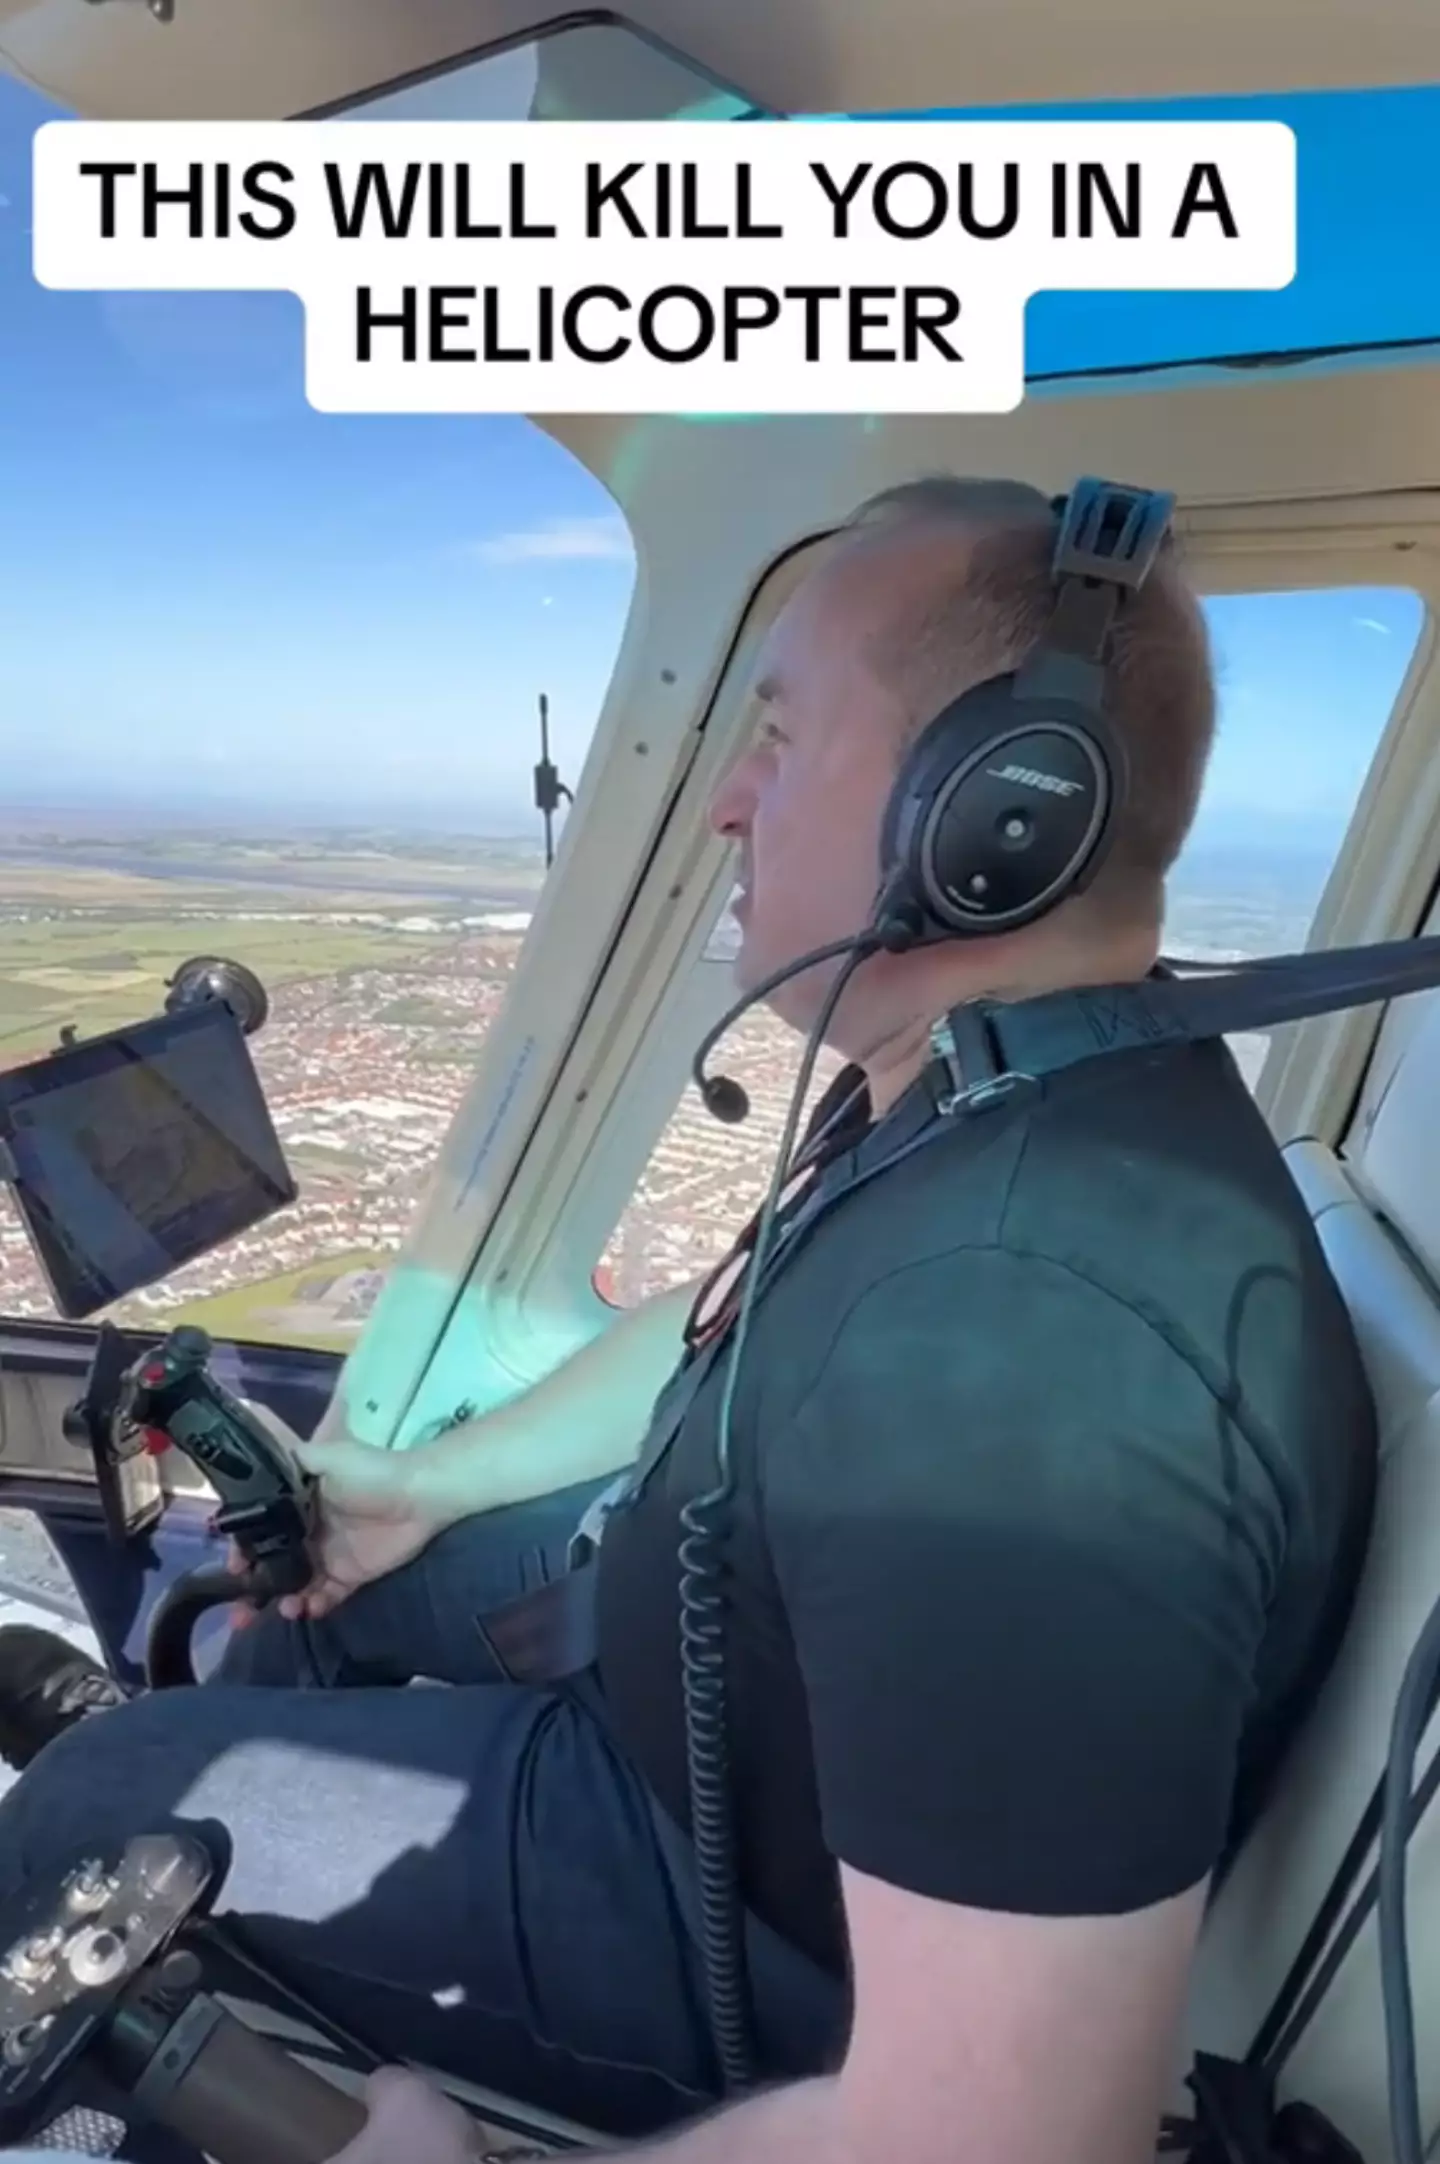 Pilot Dave Fishwick talks viewers through the one thing you must "never, ever, ever" do in a helicopter.